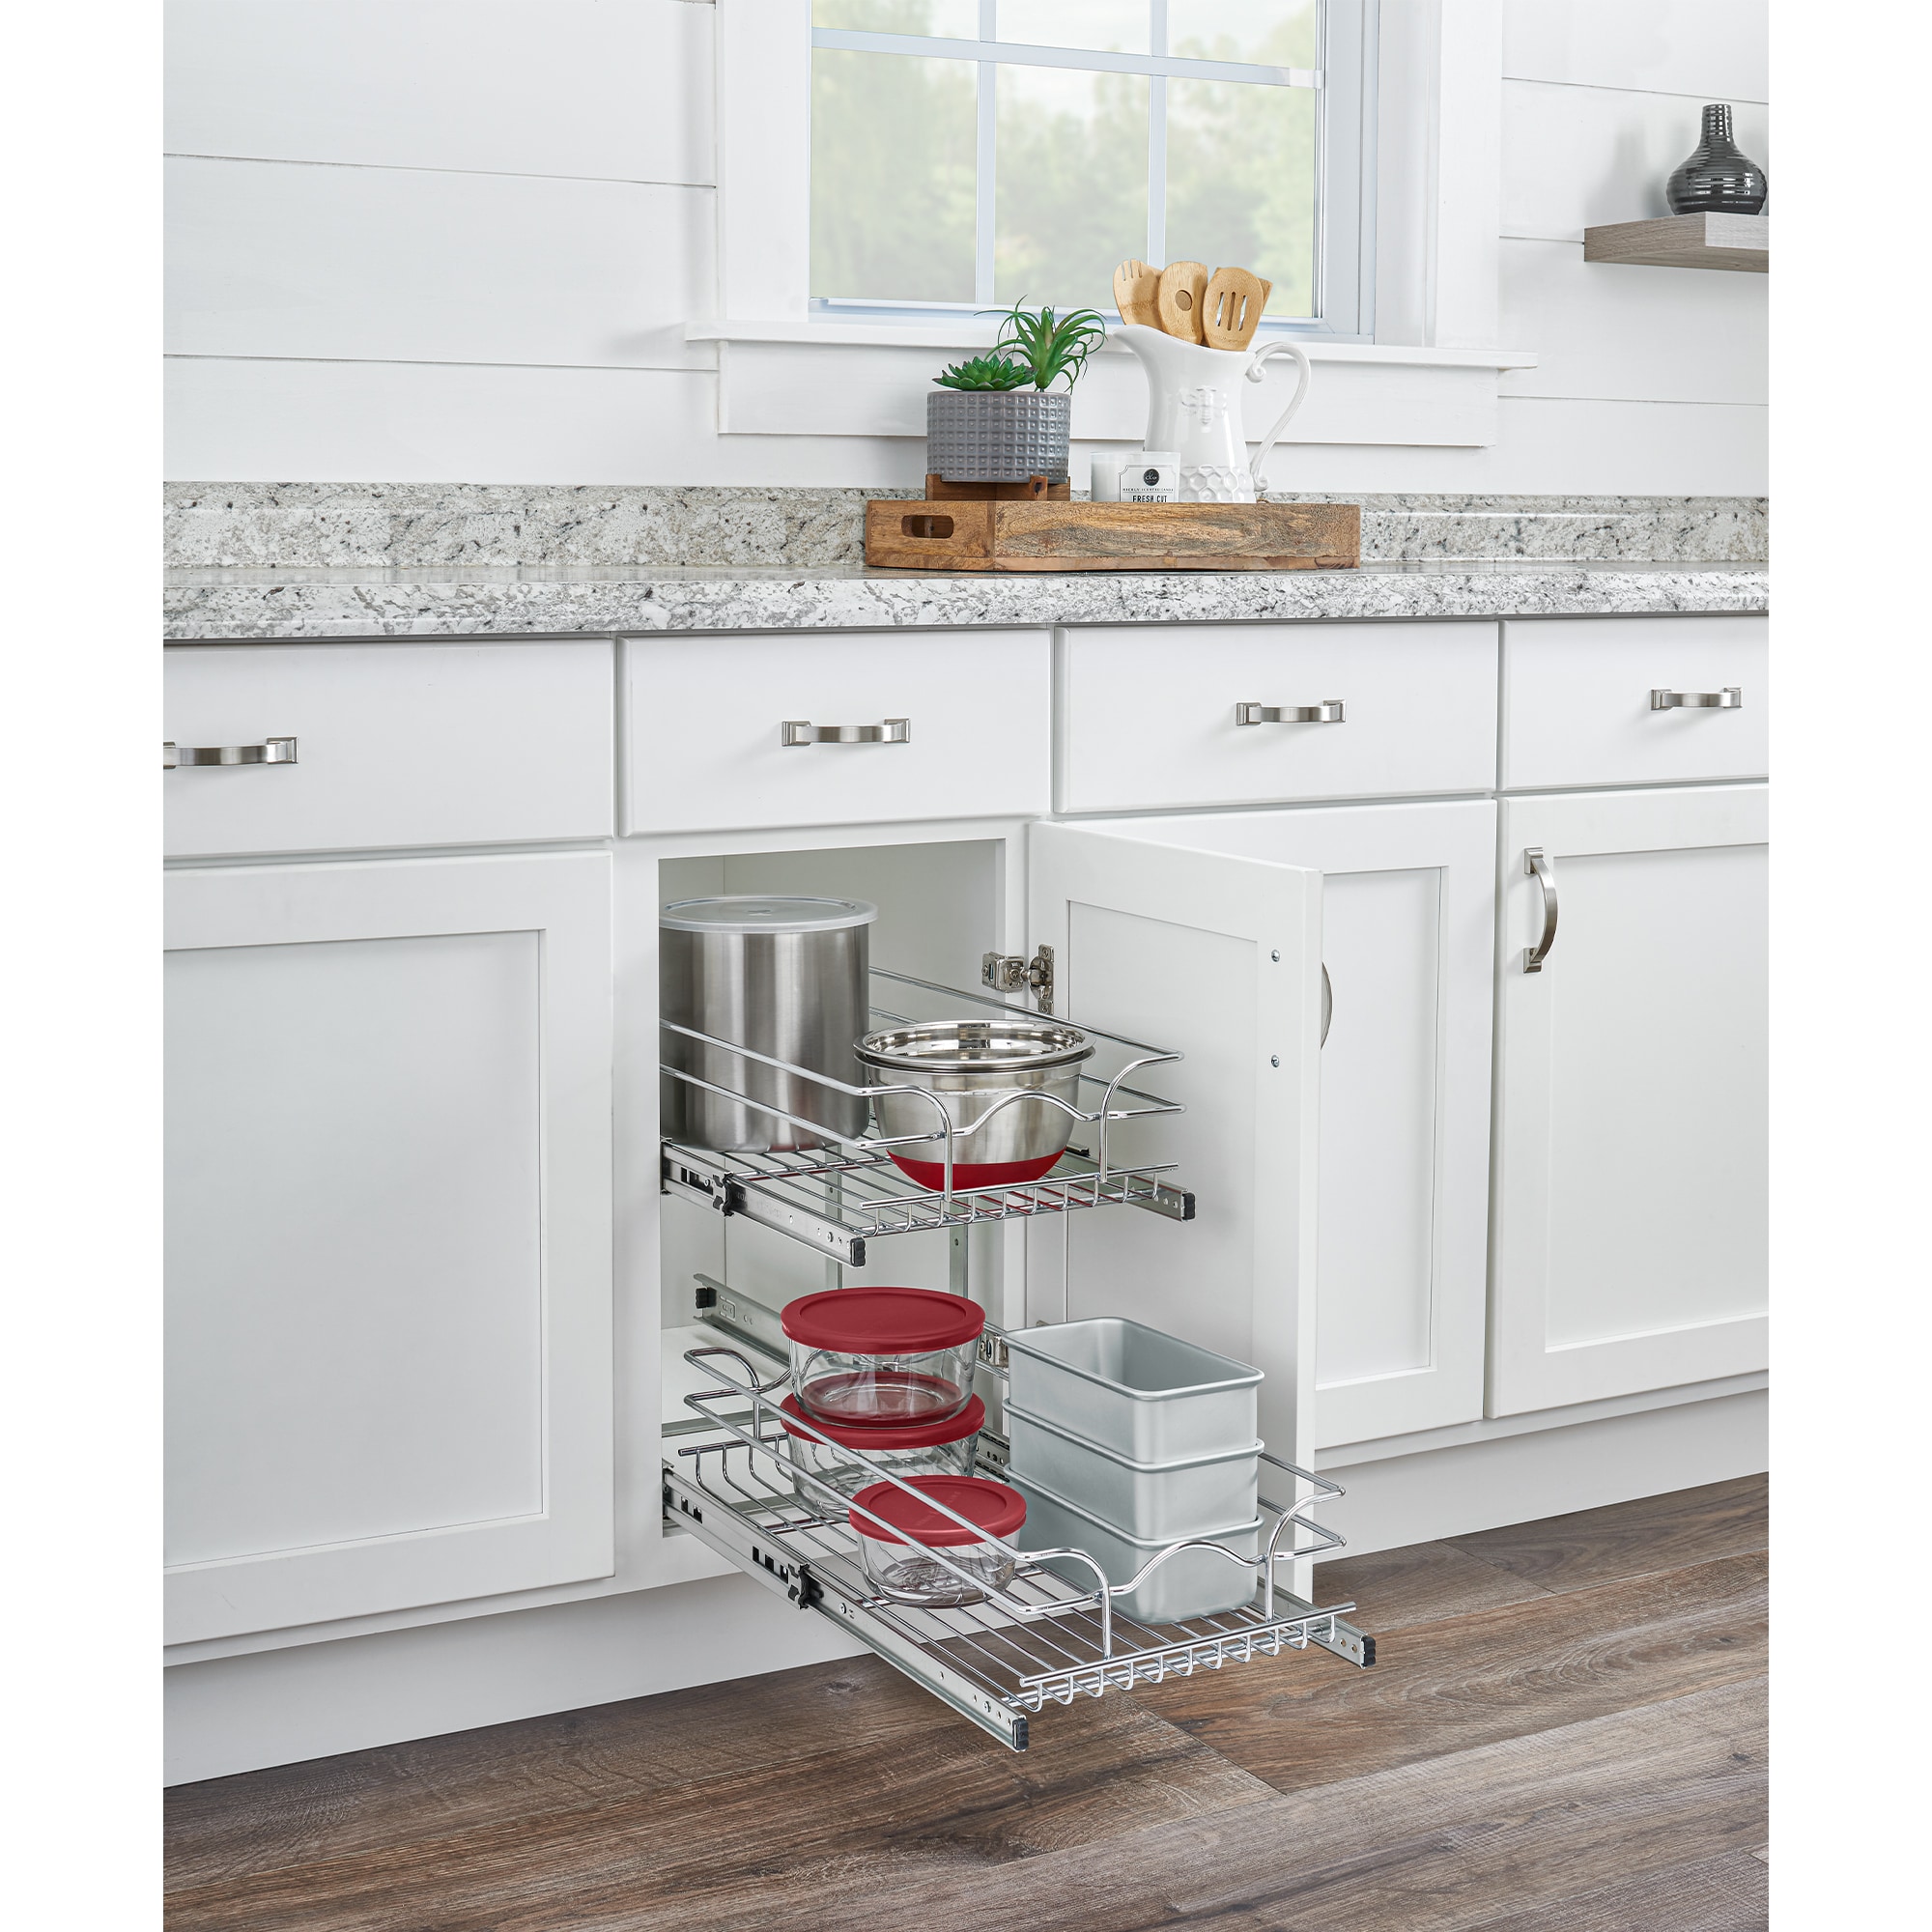 Rev-A-Shelf 5WB2-1222CR-1 12 in x 22 in Two-Tier Pull-Out Baskets - Chrome